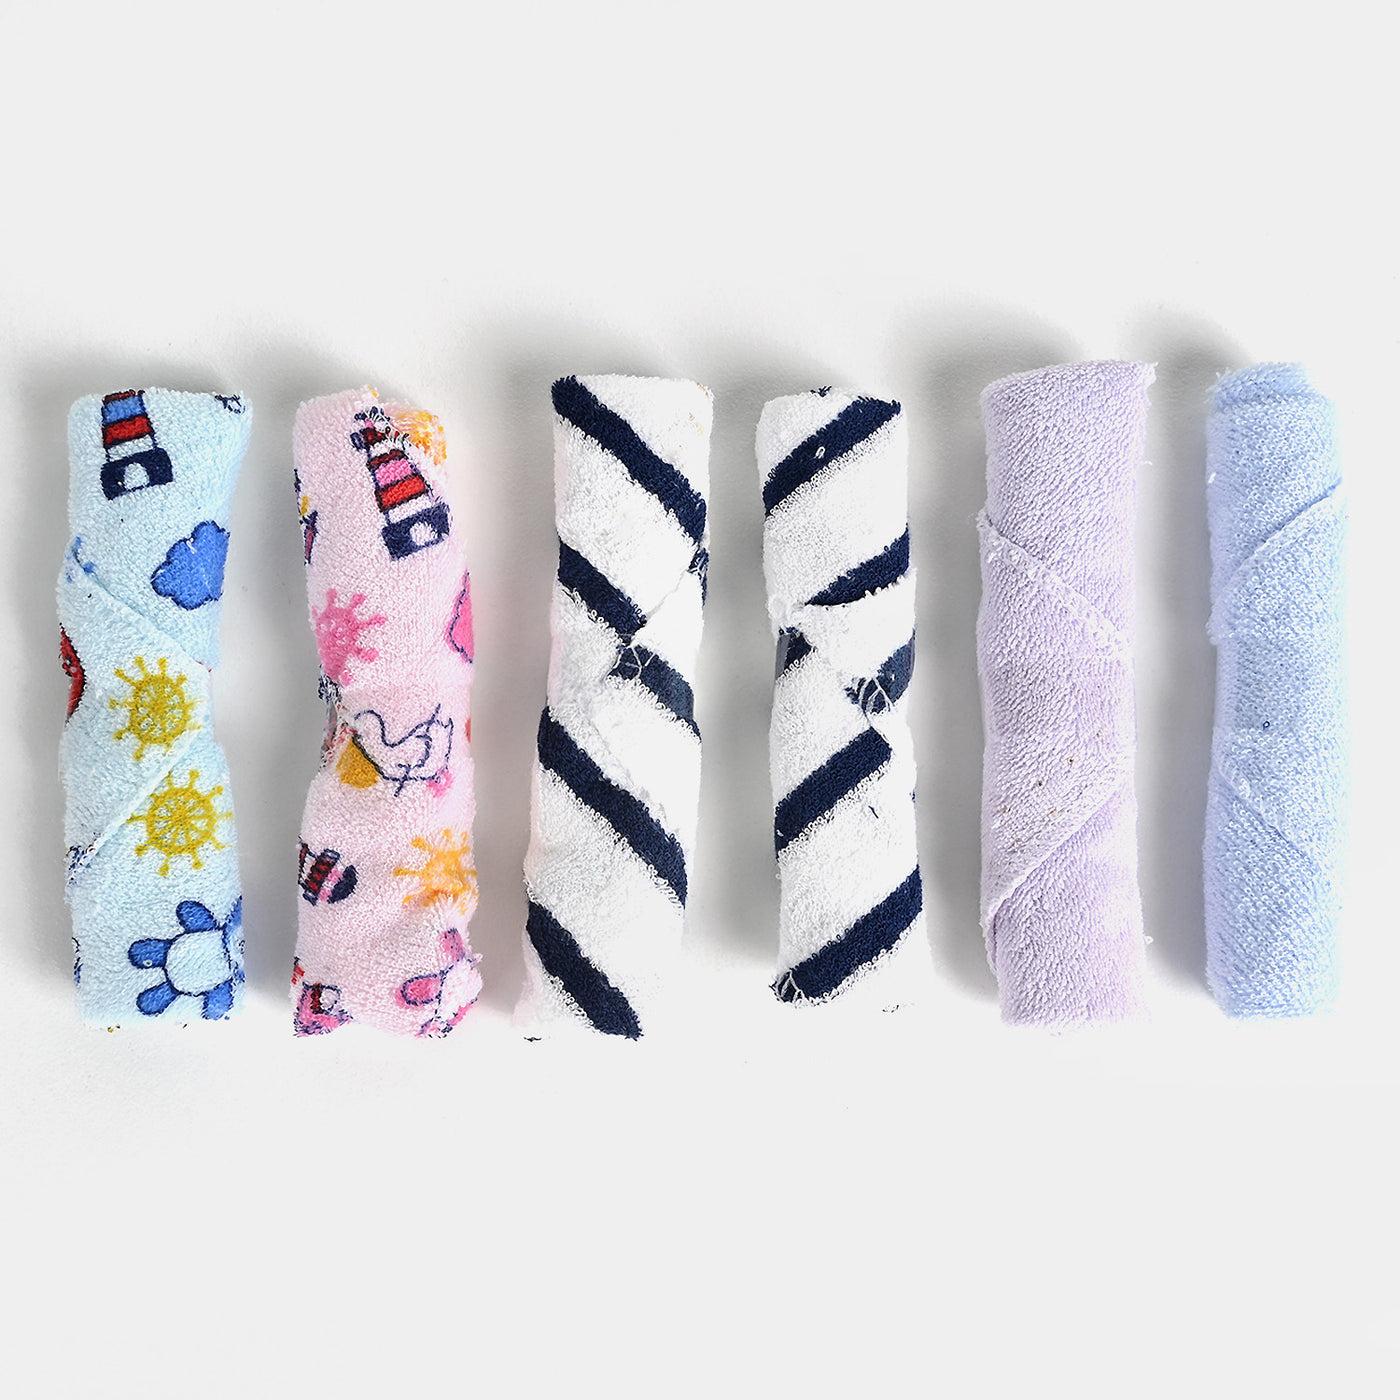 Prisma Face Cloth Towel For Baby Pack Of 6